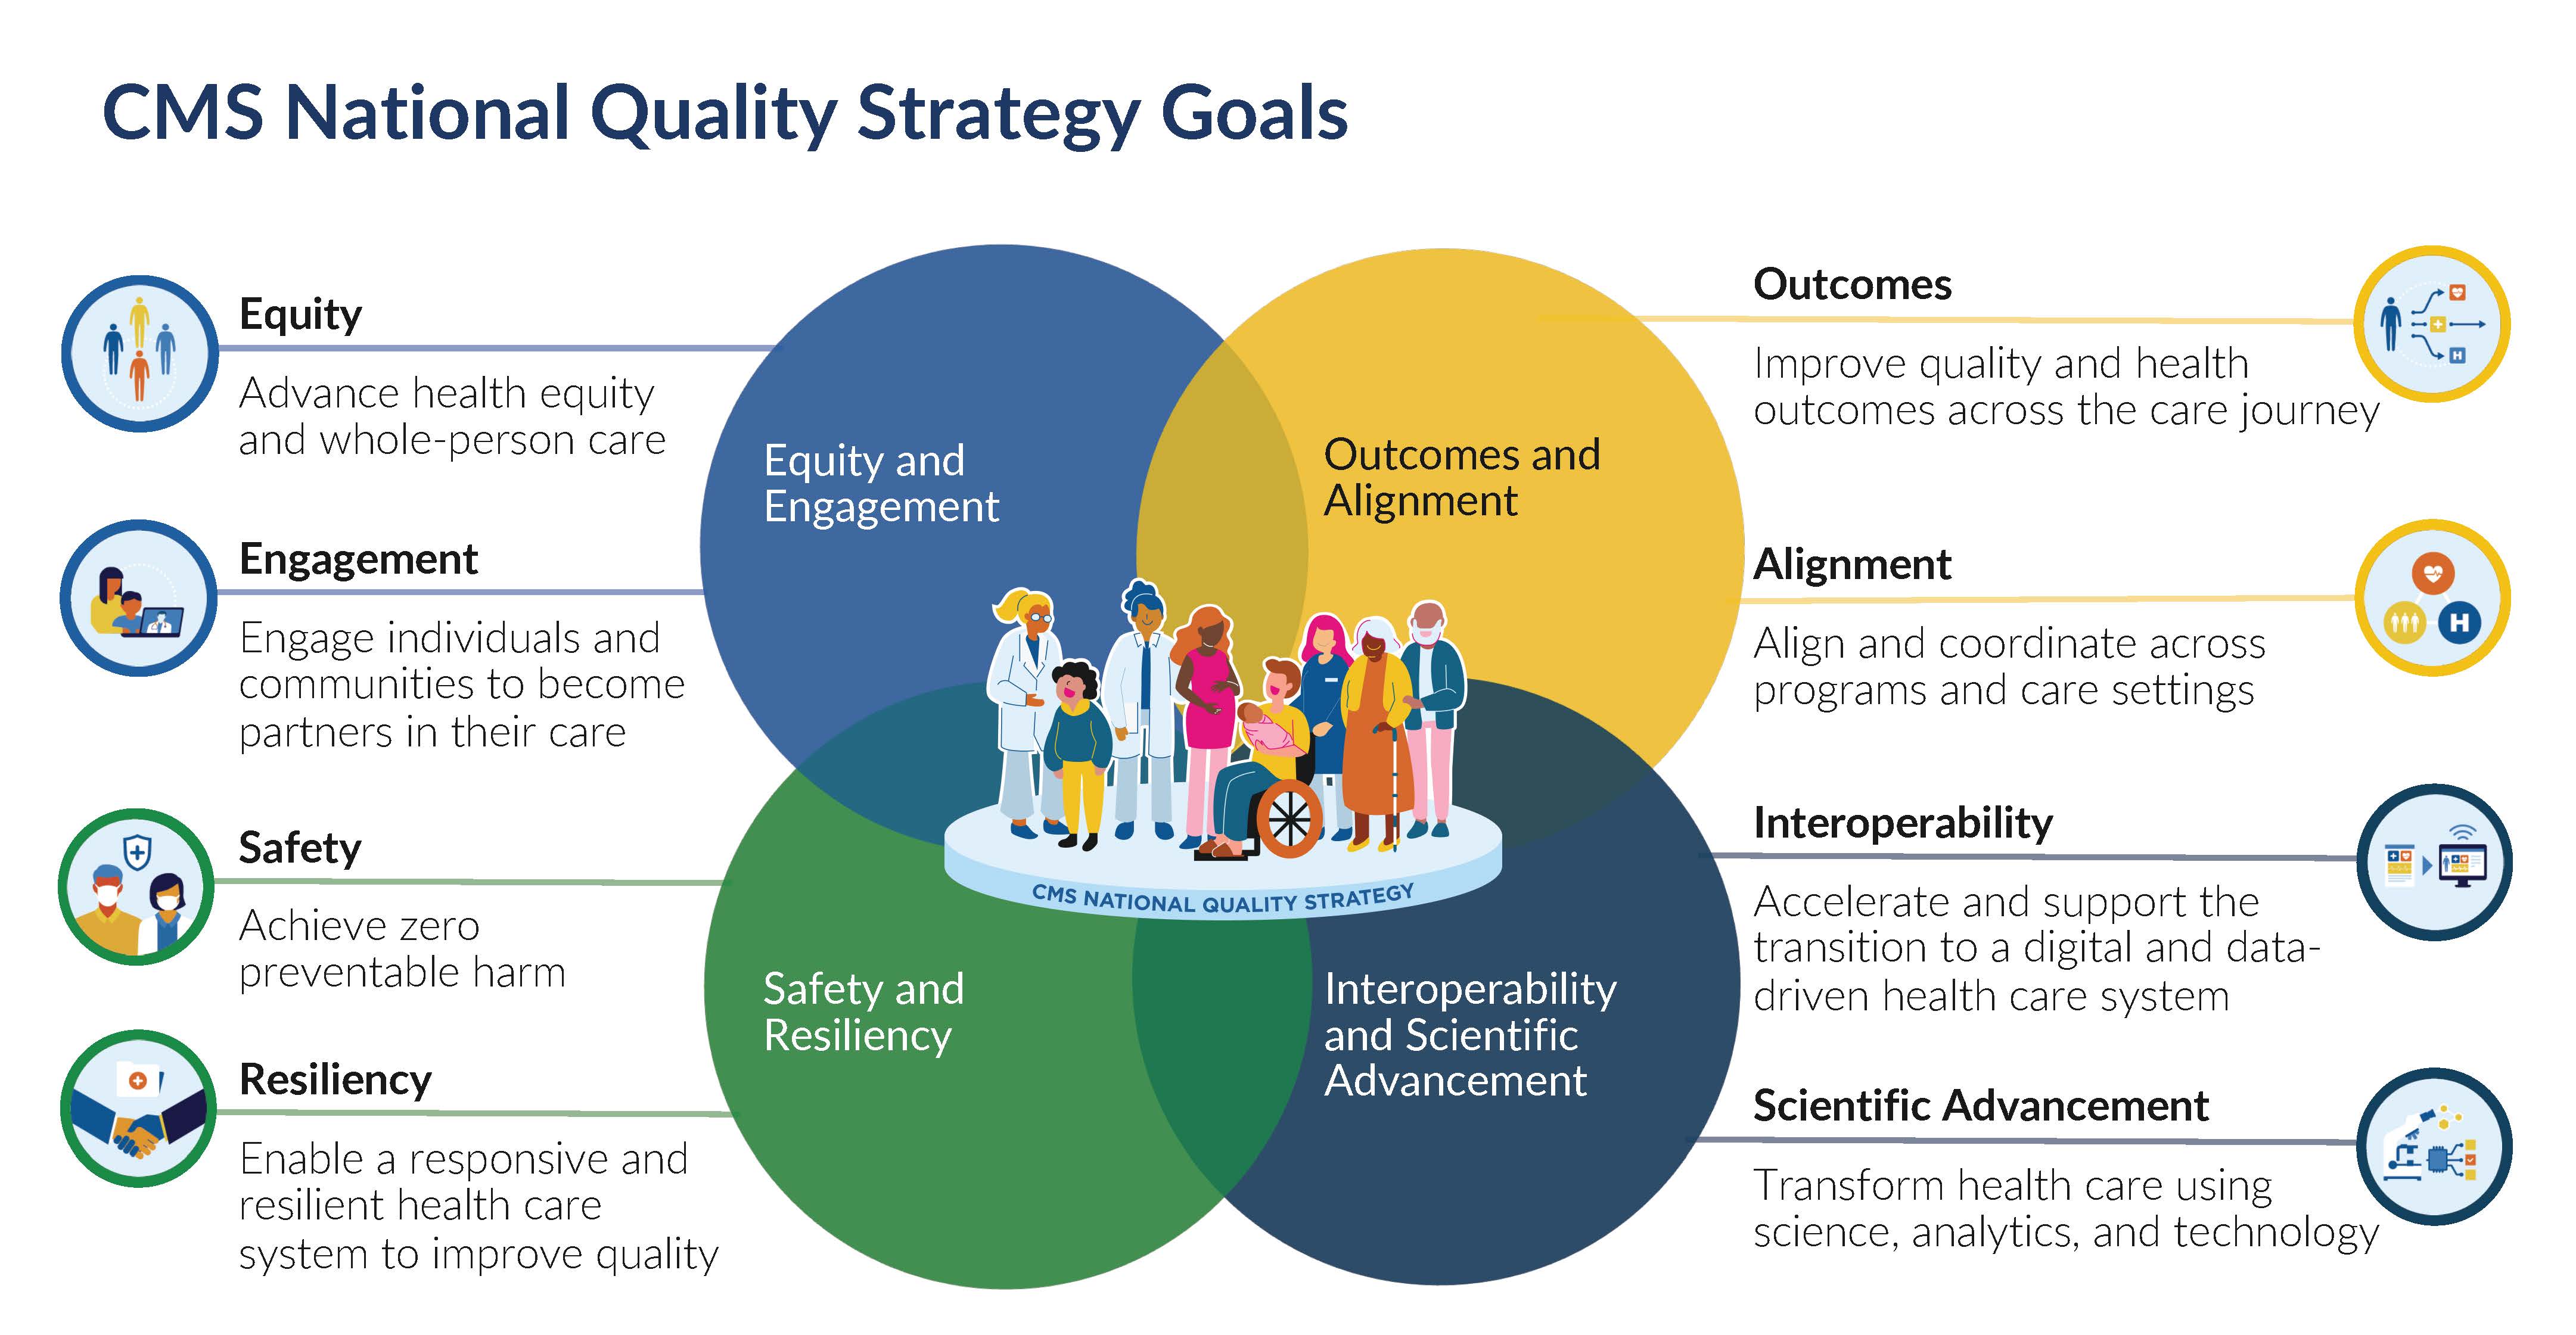 CMS National Quality Strategy Priority Areas and Goals